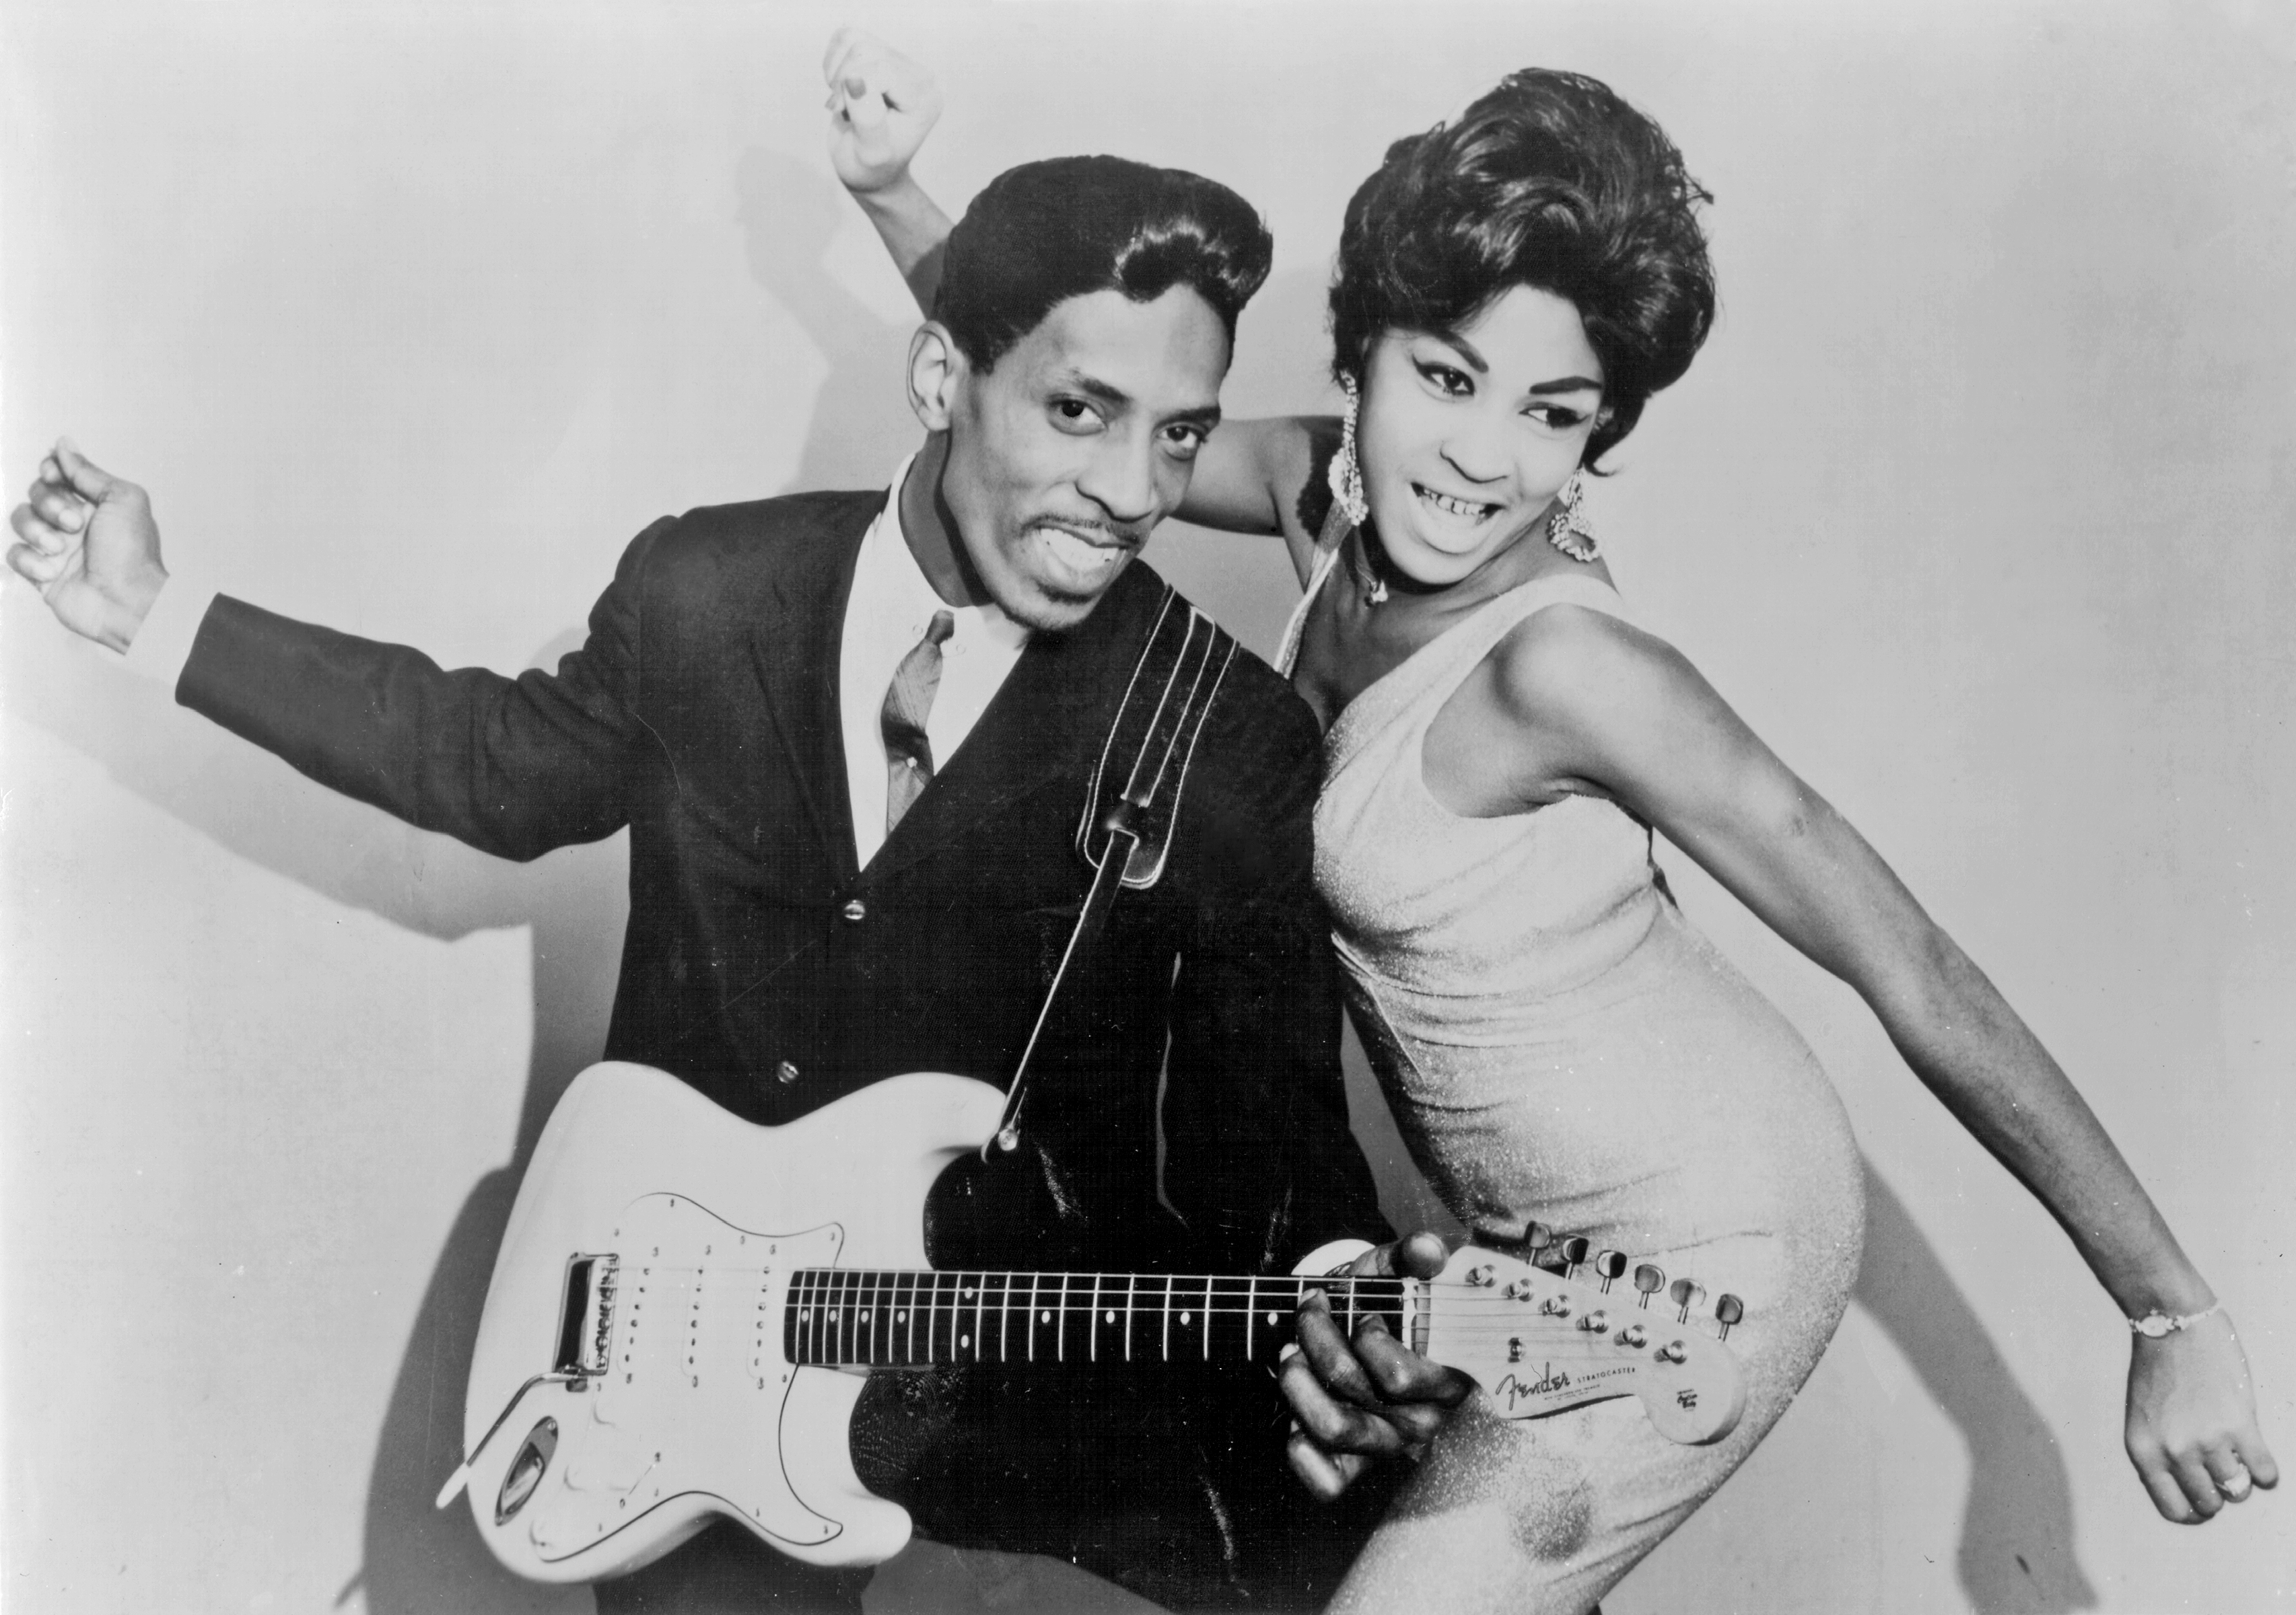 R&B duo Ike & Tina Turner pose for a portrait on January 1, 1961 | Source: Getty Images